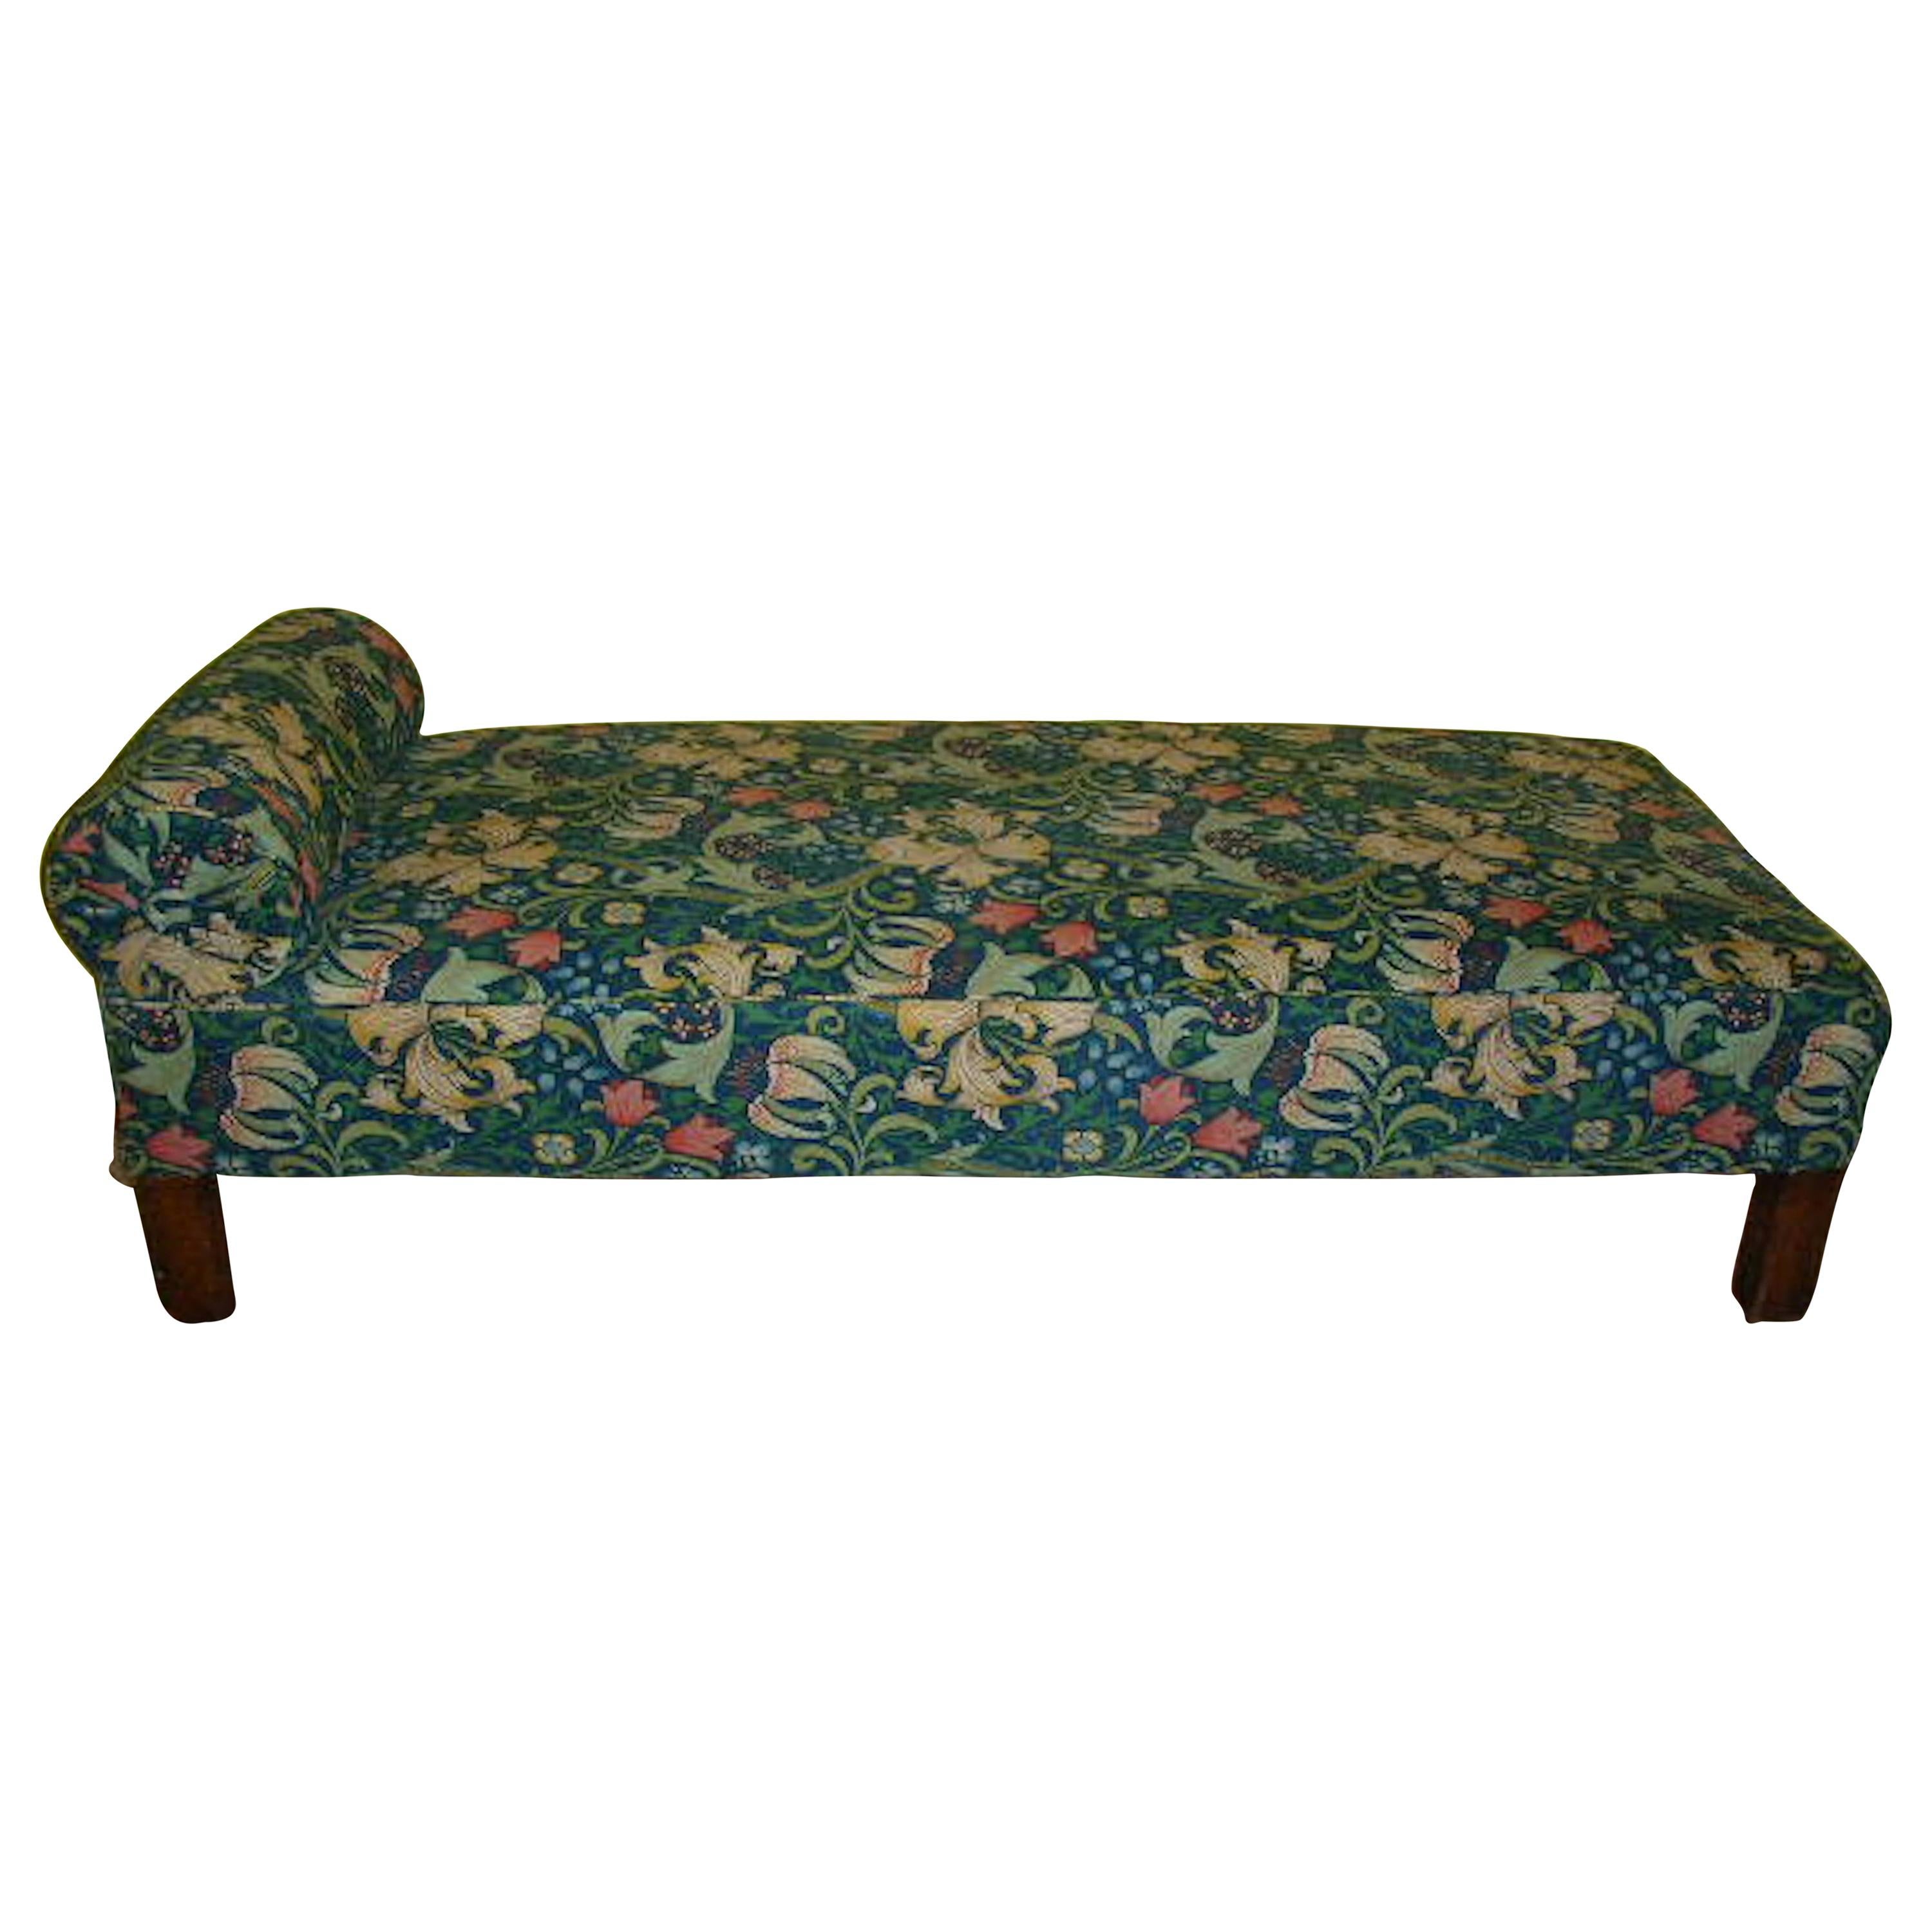 Liberty & Co. Attr. An Arts & Crafts Oak Chaise or Day Bed in Morris & Co Fabric